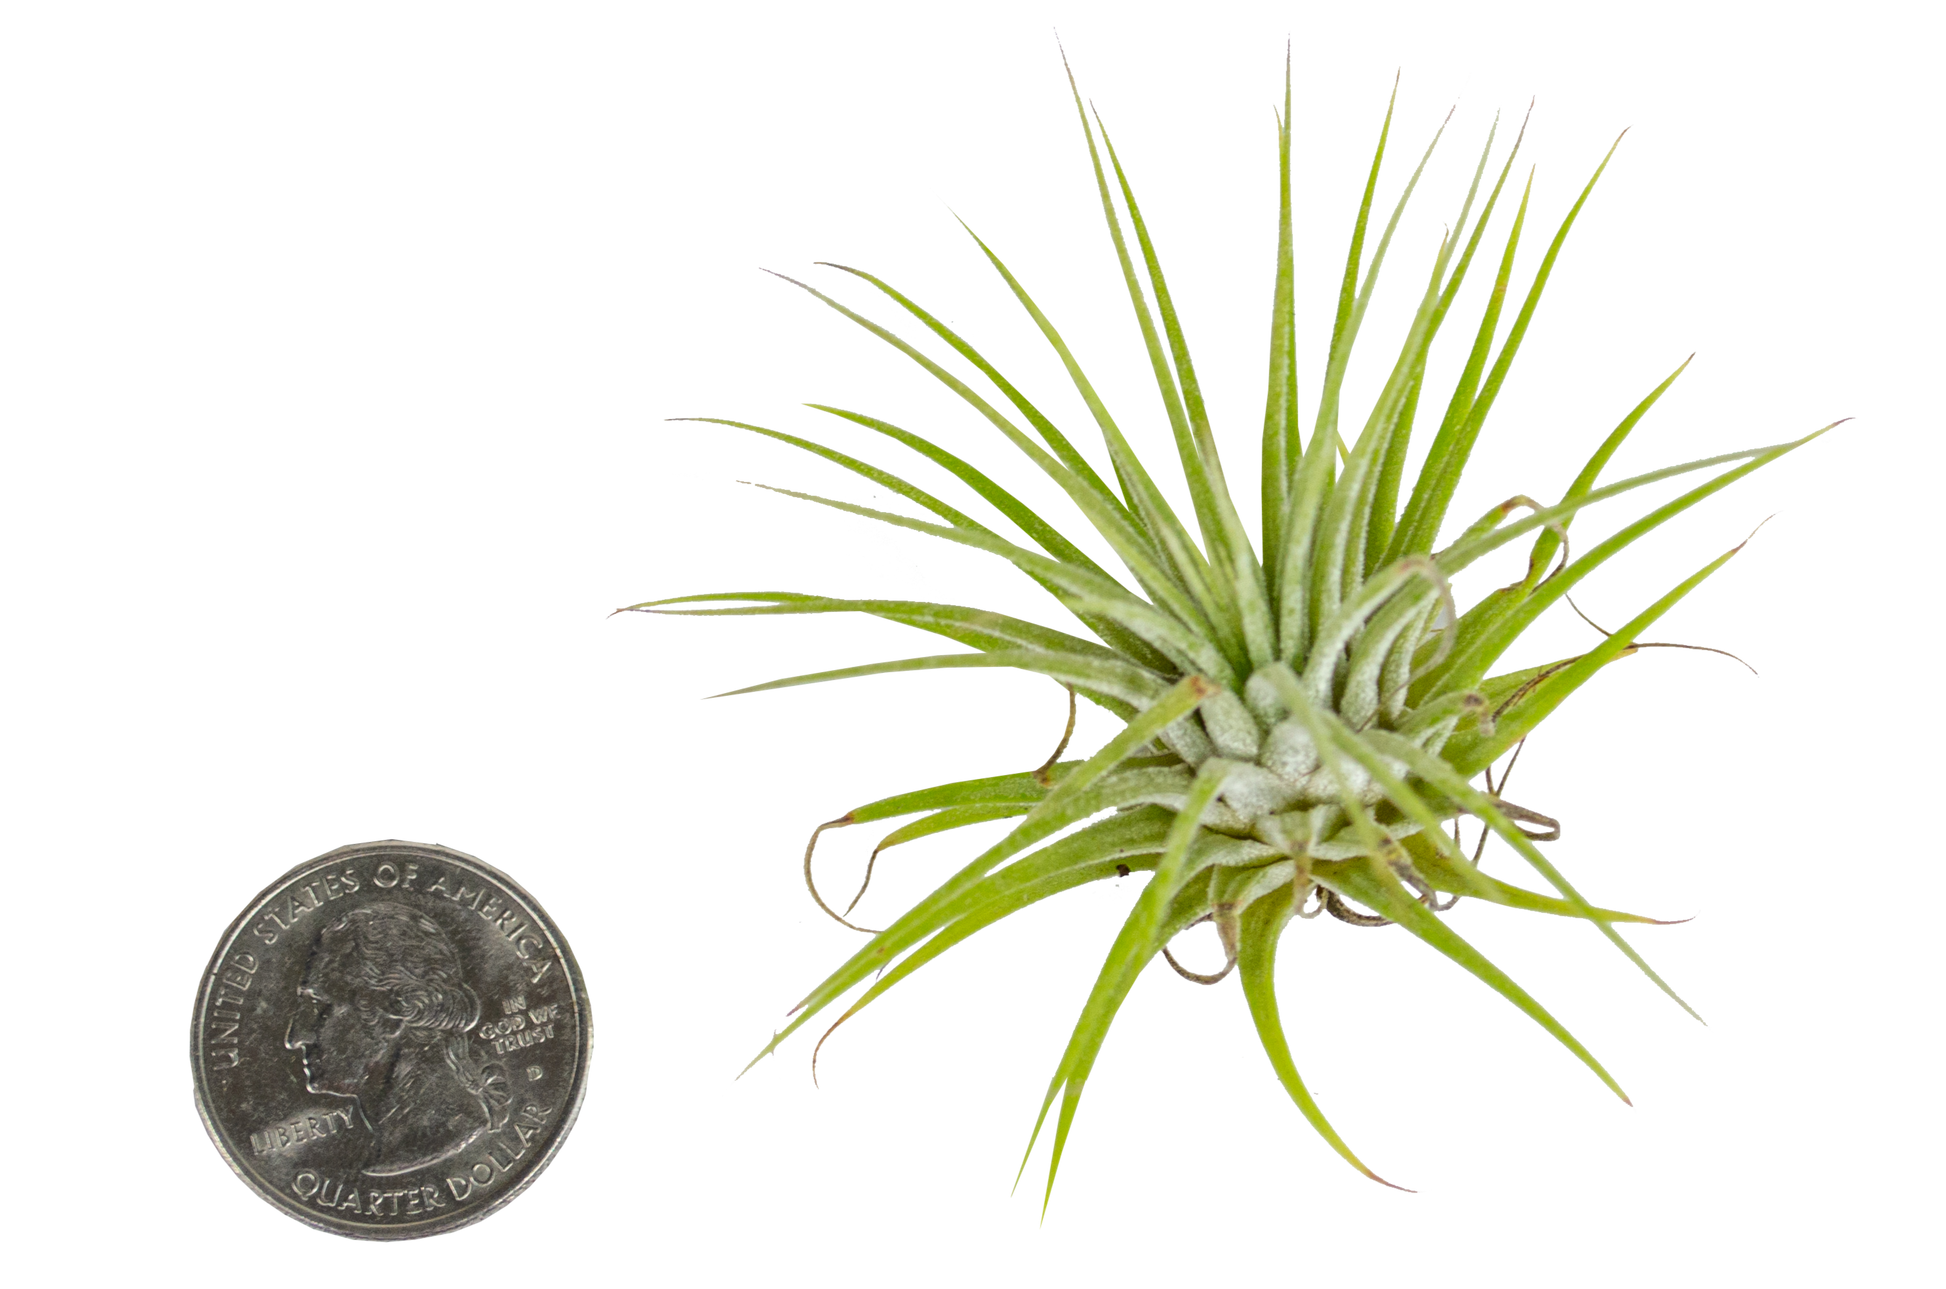 Air Plants - The Standard Design Group